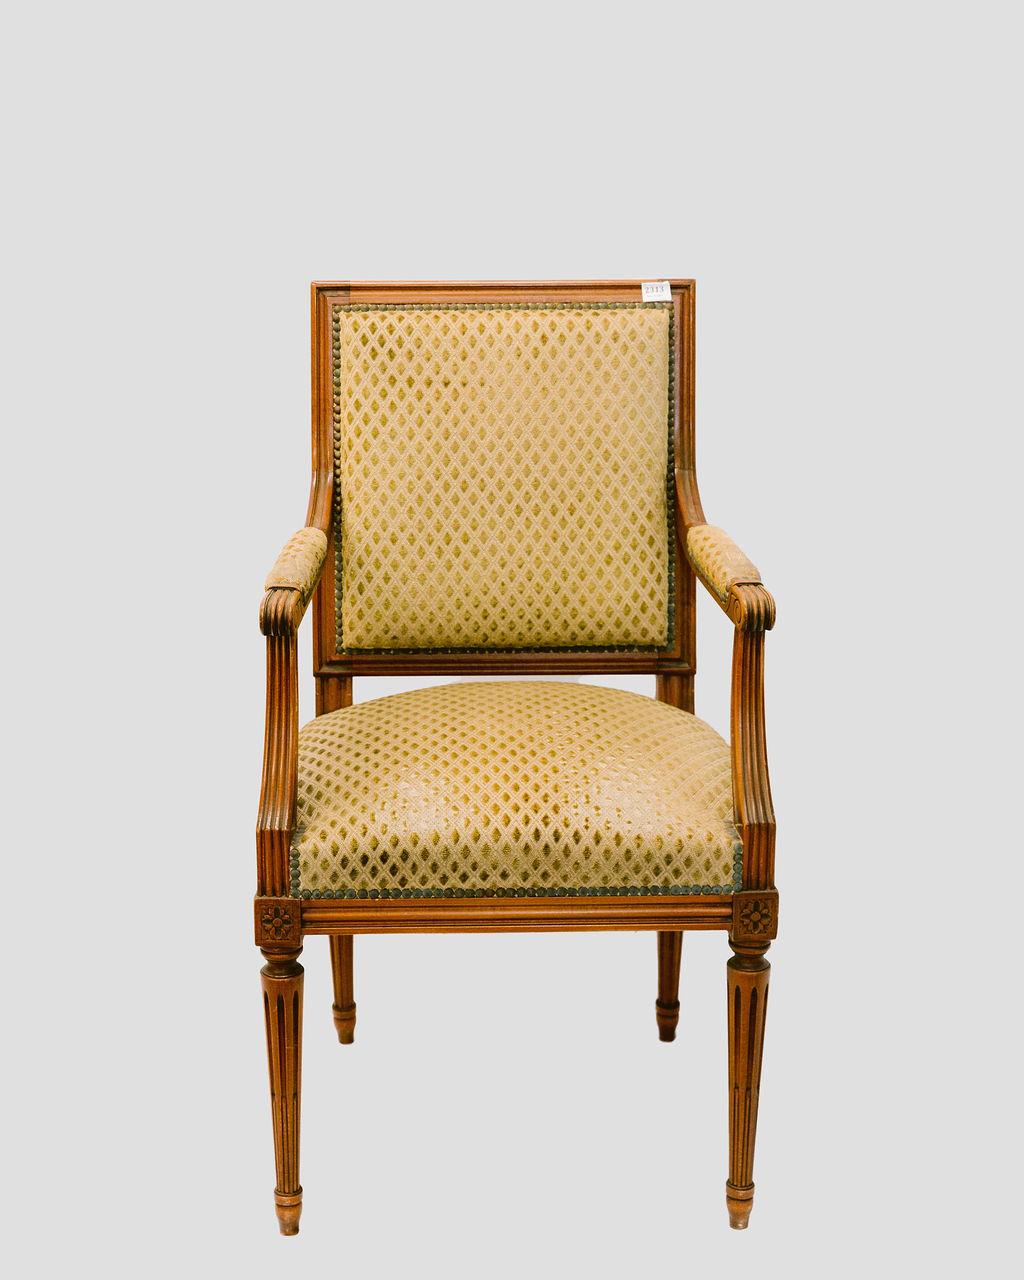 Louis XVI style carved walnut dining chairs, French, early 20th c., tacked, velvet upholstery with tapered, fluted cylindrical legs with rosette detail. Sides- H.- 36 1/4 in., W.- 19 1/2 in., D.- 19 in., Fauteuil- H.- 38 1/4 in., W.- 21 in., D.- 22